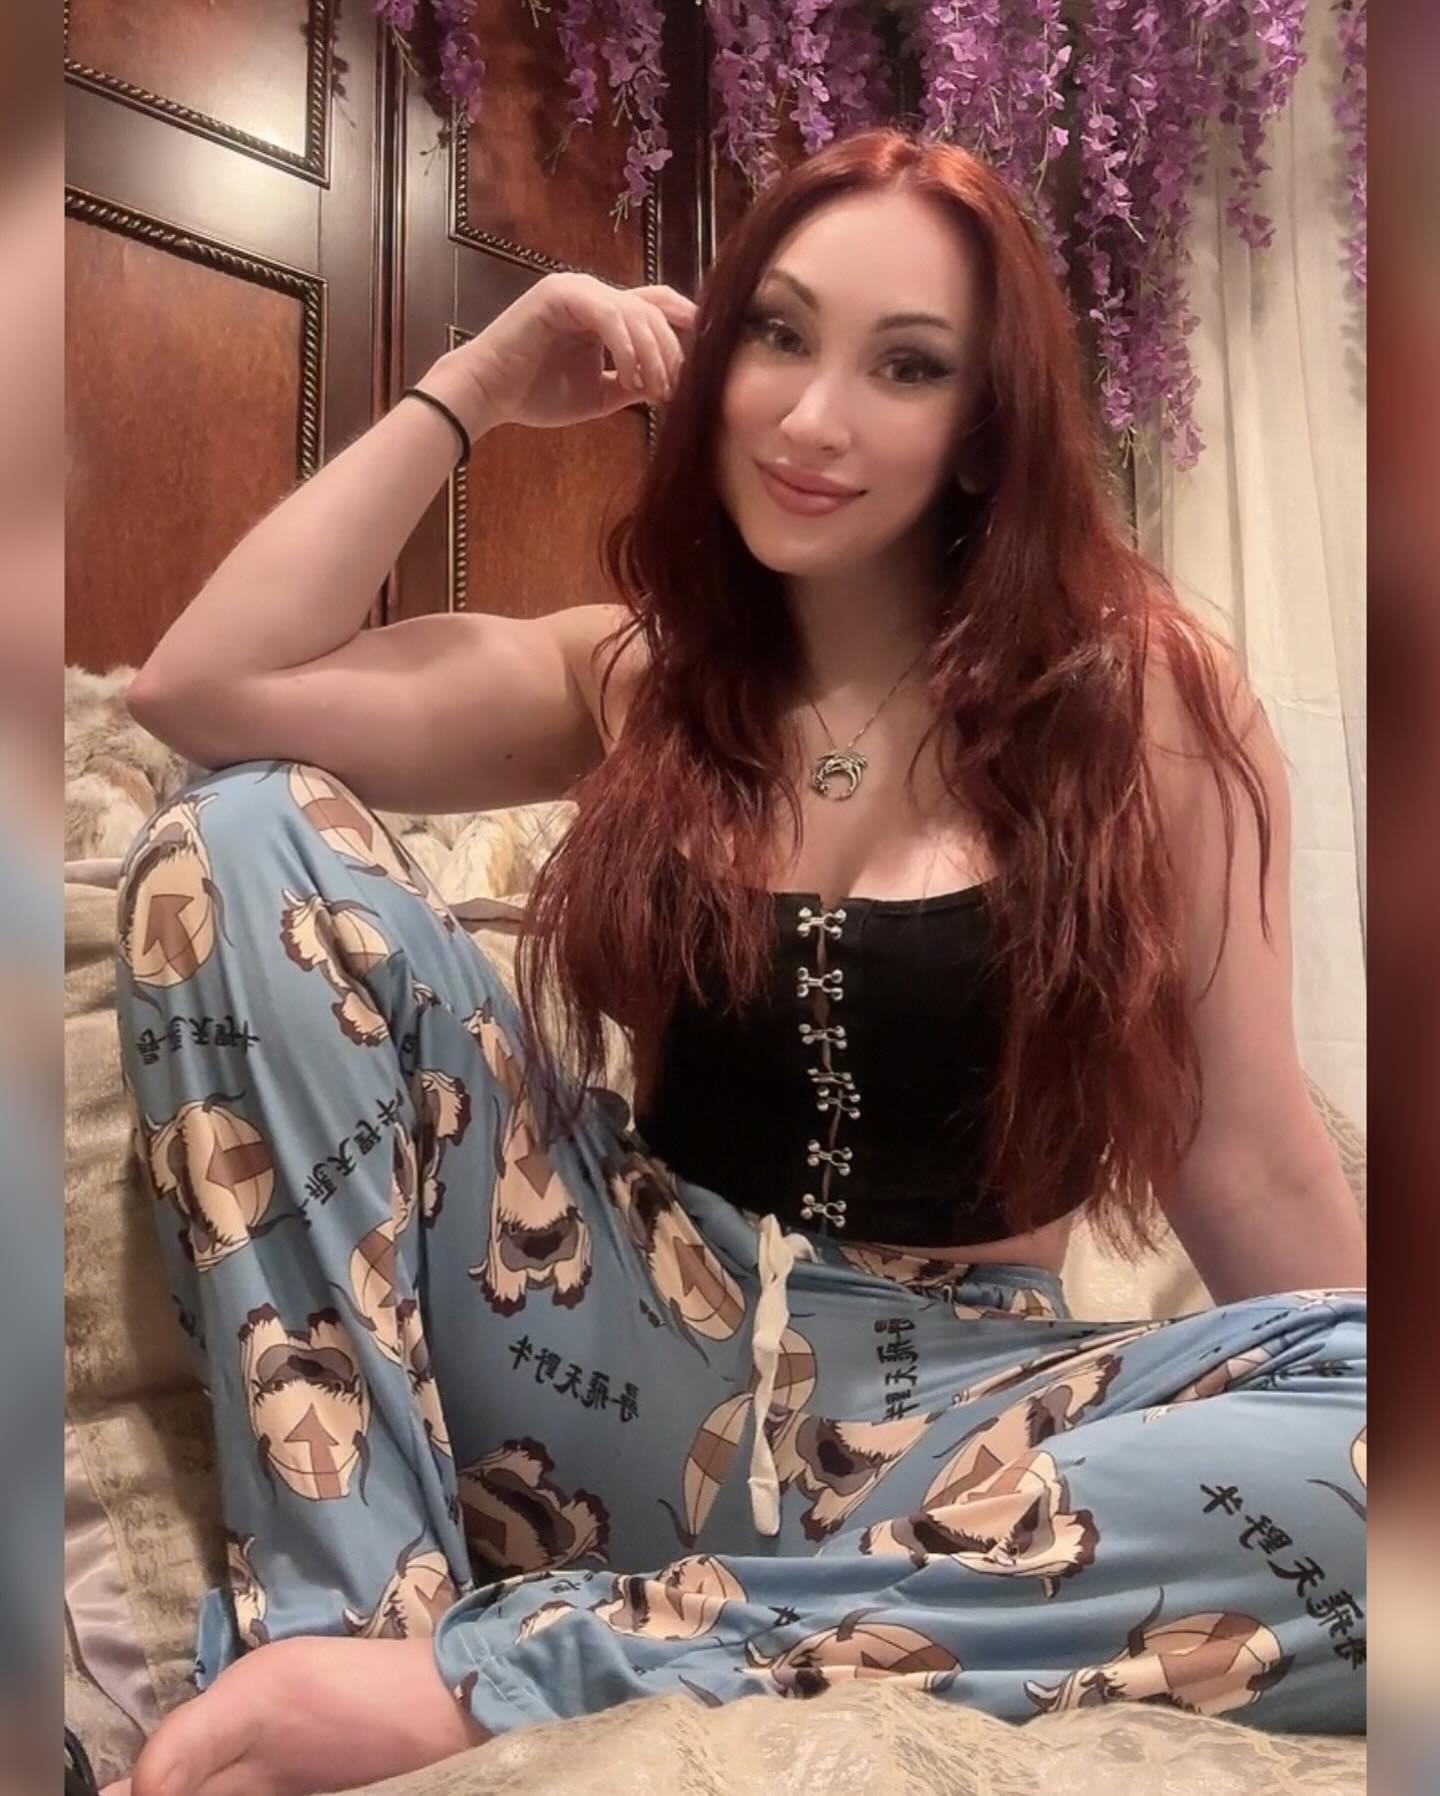 (NEWS!) Guess what, guys?
1. LOOK AT MY COOL APPA PANTS FROM @hottopic :DDD (And, no, I did NOT like the live-action - OG Avatar all the way! 😂 Comment if you want the tea on why I wanted to yeet the live-action off a cliff, haha. I practically have a PowerPoint presentation on this because writing 4000-page analyses until 4 in the morning each time I saw ATLA posts wasn’t exactly helping me have a healthy sleep routine. 🙃) 
2. I moved! (Again!) I had to do this move (after moving 8 months prior) for some pretty serious reasons and I am SO excited to finally feel like I have a more permanent, stable home I can start to thrive in! 
And I finally started putting up wisteria and started decorating with a full fantasy backdrop and furniture…why?….
3) Because I’m getting a streaming setup going! I’ve had enough people watch me casually gaming on discord tell me I’m far too much of a hilarious little clown (I assume they’re referring to how I’m actually just the manifestation of a chaotic mass fever-dream, or rather, three hyperactive weasels in a trench coat - take from that what you will 😂) to not be streaming and letting others watch me derp-derp-derp my way around my favorite games or crafting projects, soooo hereeee we go! 

 #sponsoredbyHT #htfxmarchmusthaves